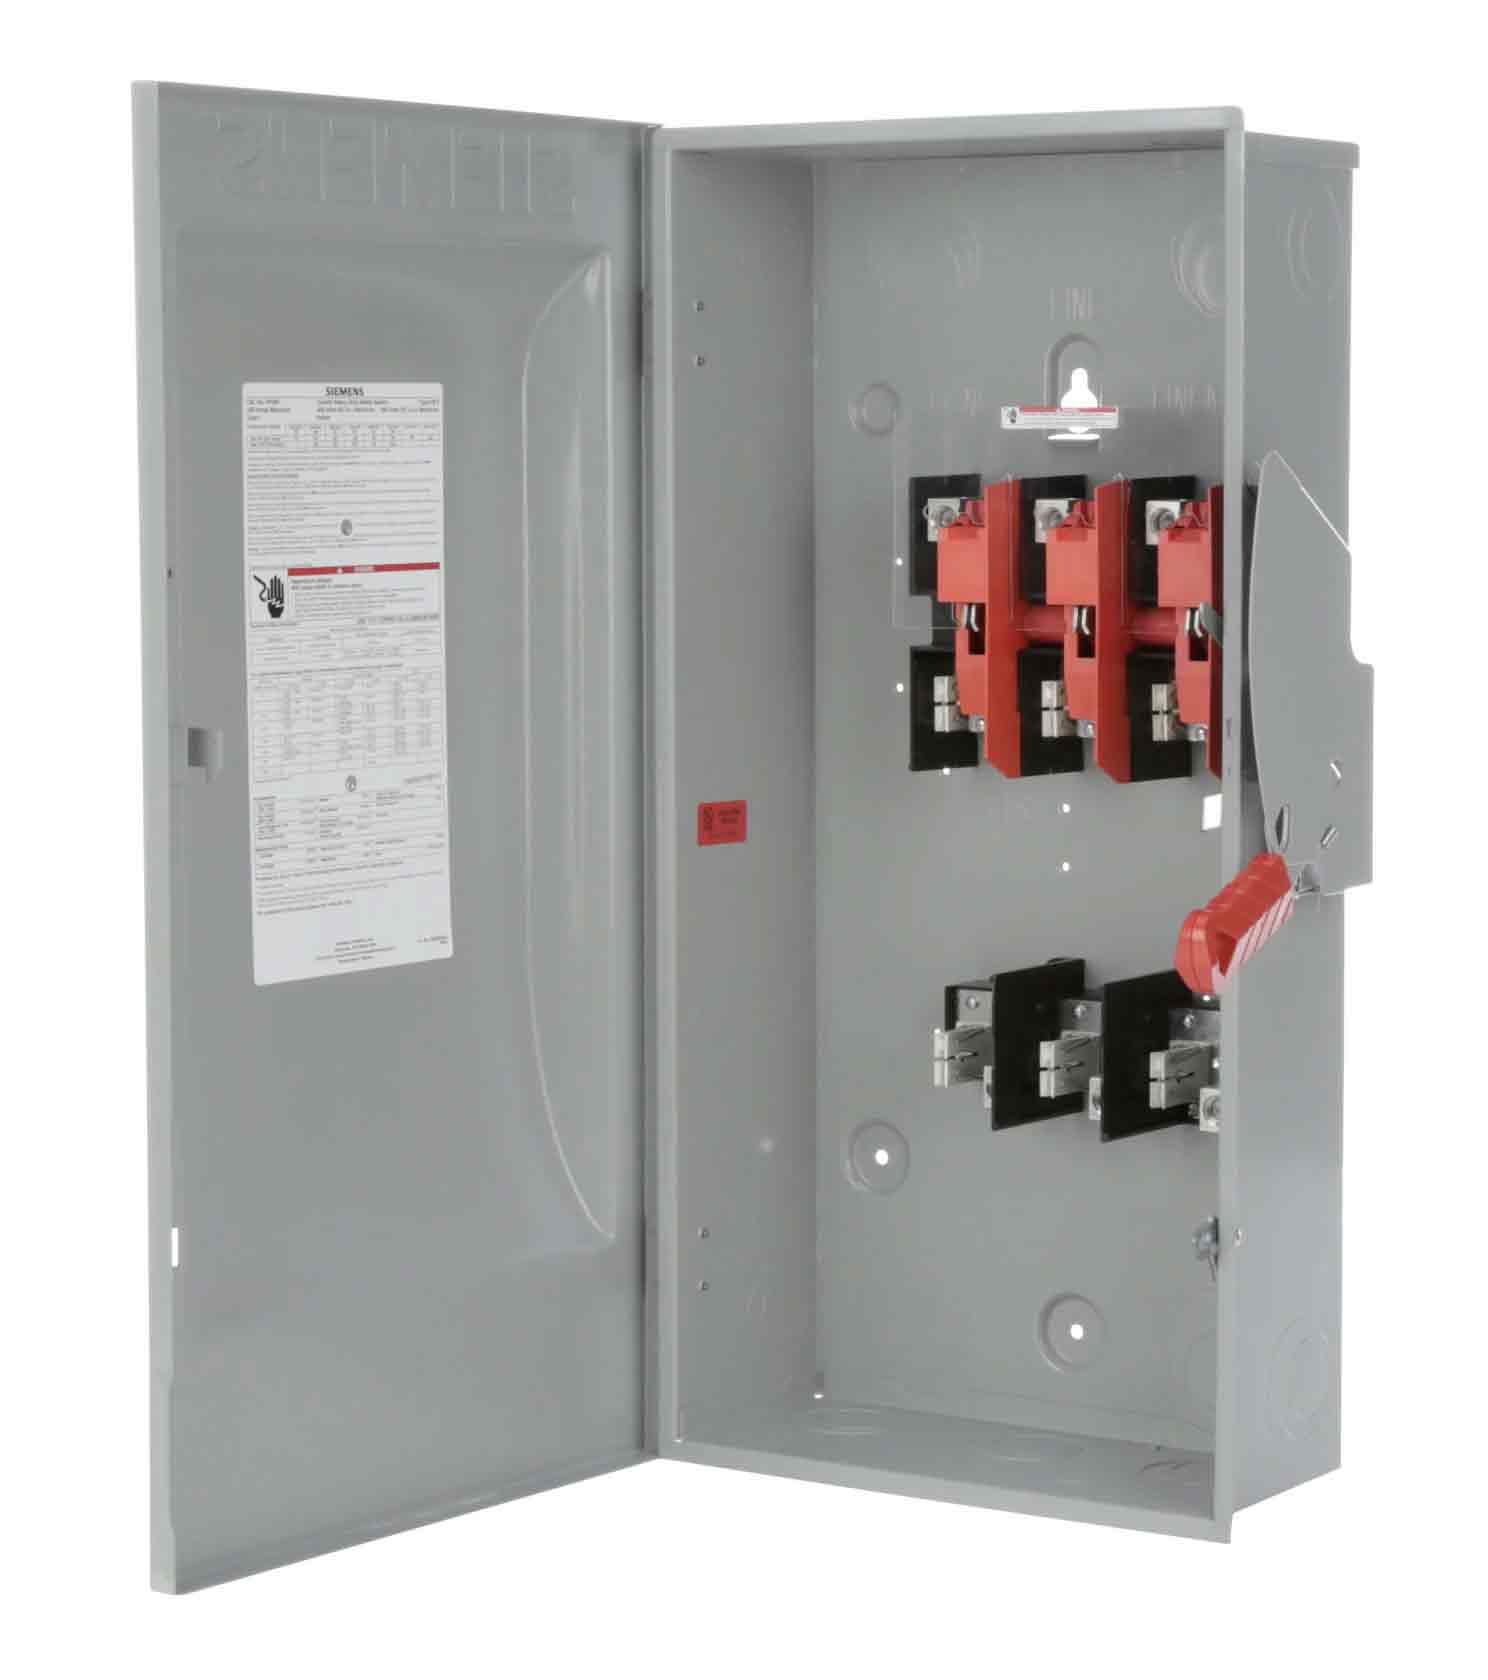 HFC364 - Siemens - 200 Amp Disconnect Safety Switches